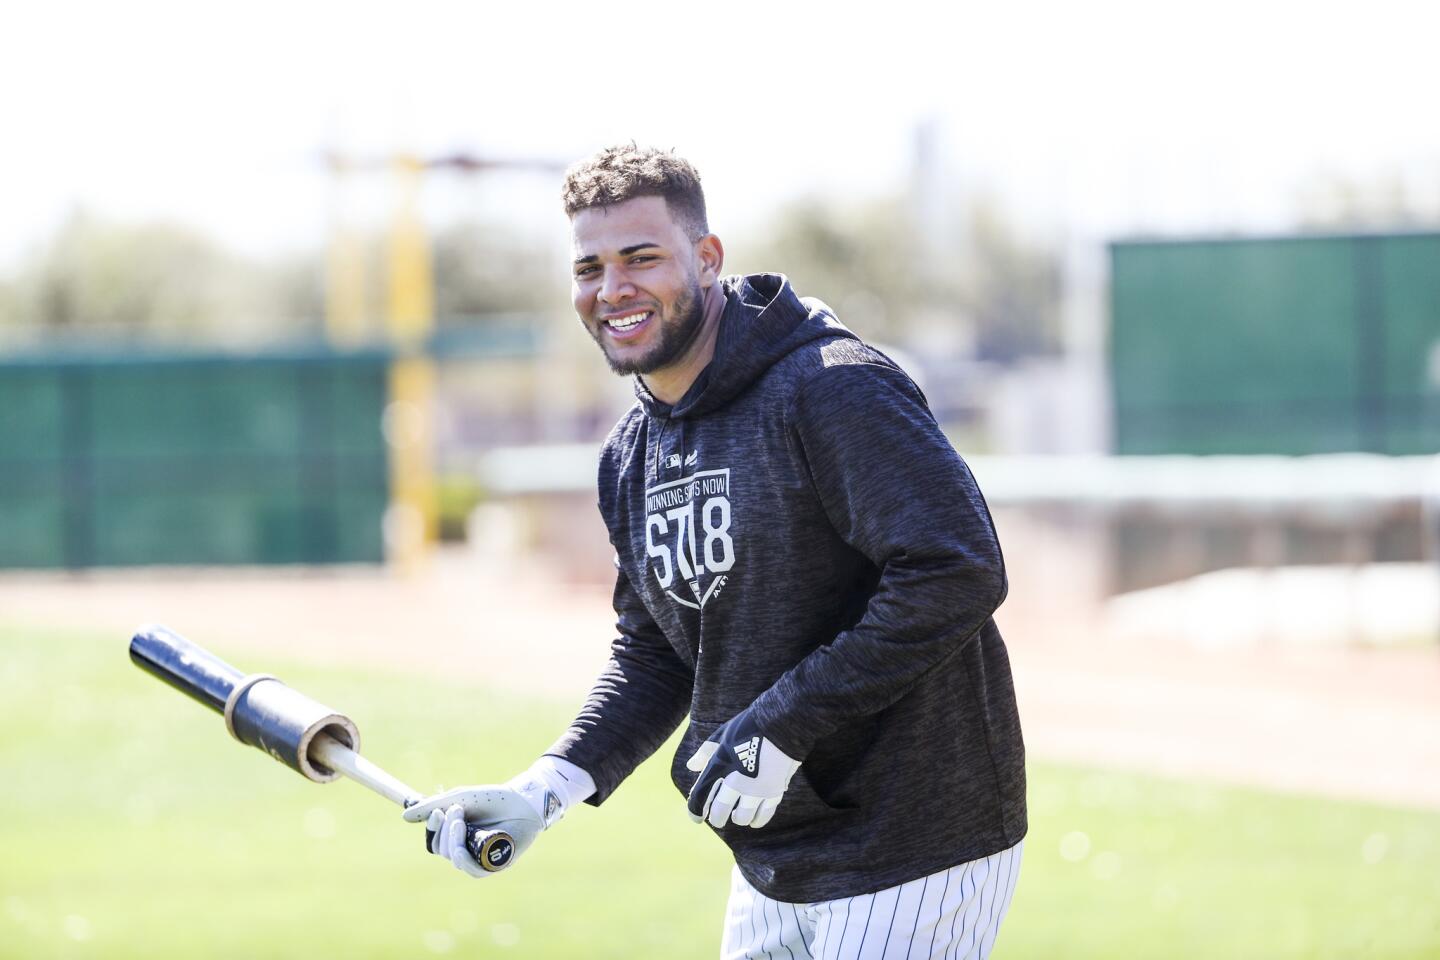 Yoan Moncada laughs while waiting to bat during White Sox spring training at Camelback Ranch on Feb. 21, 2018, in Glendale, Ariz.